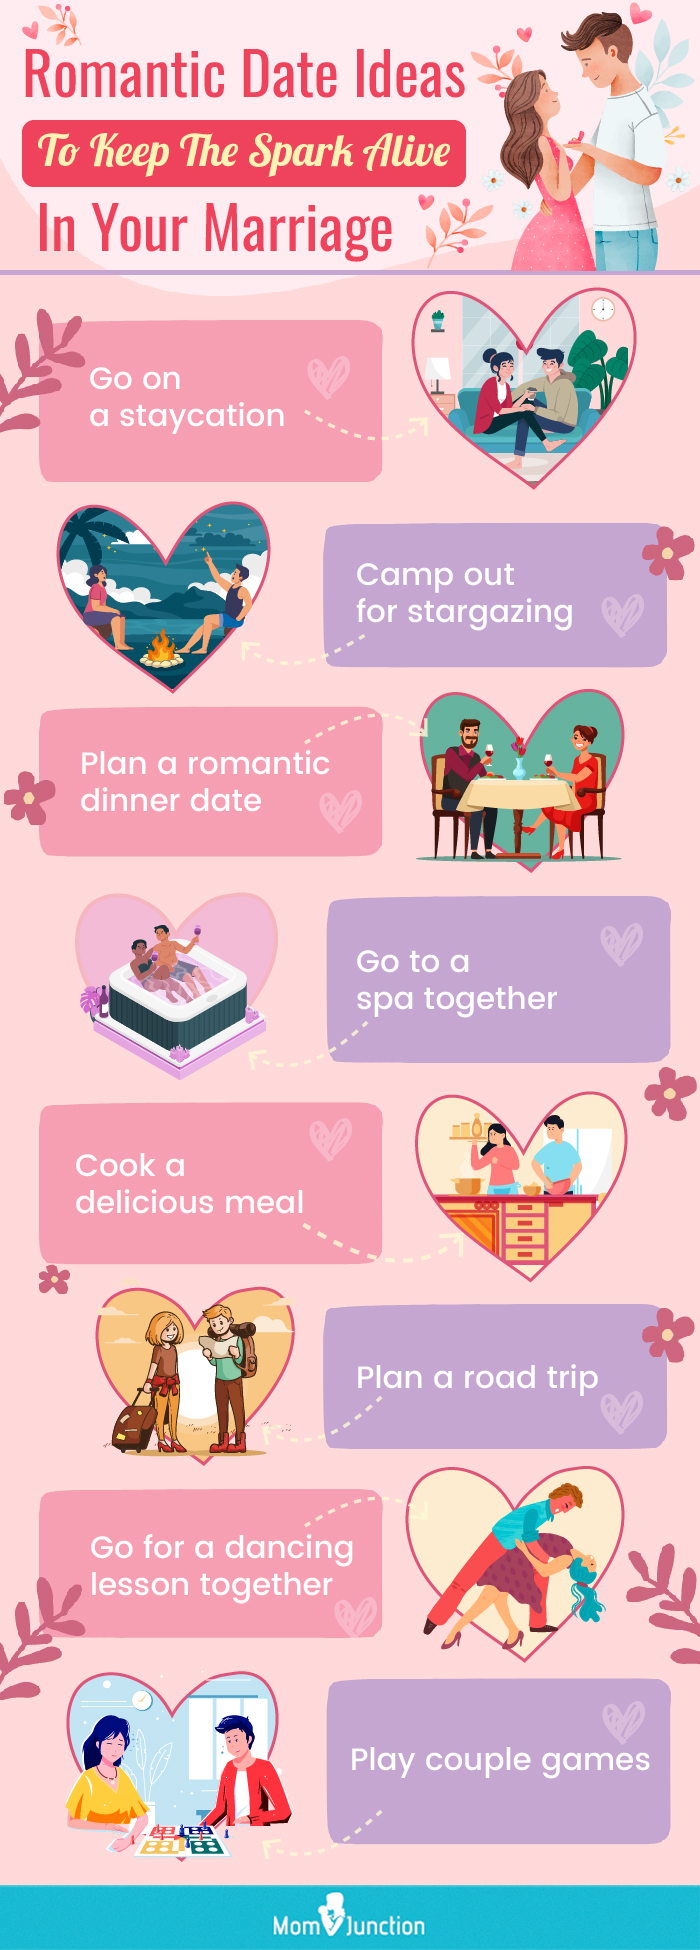 romantic date ideas to keep the spark alive in your marriage (infographic)